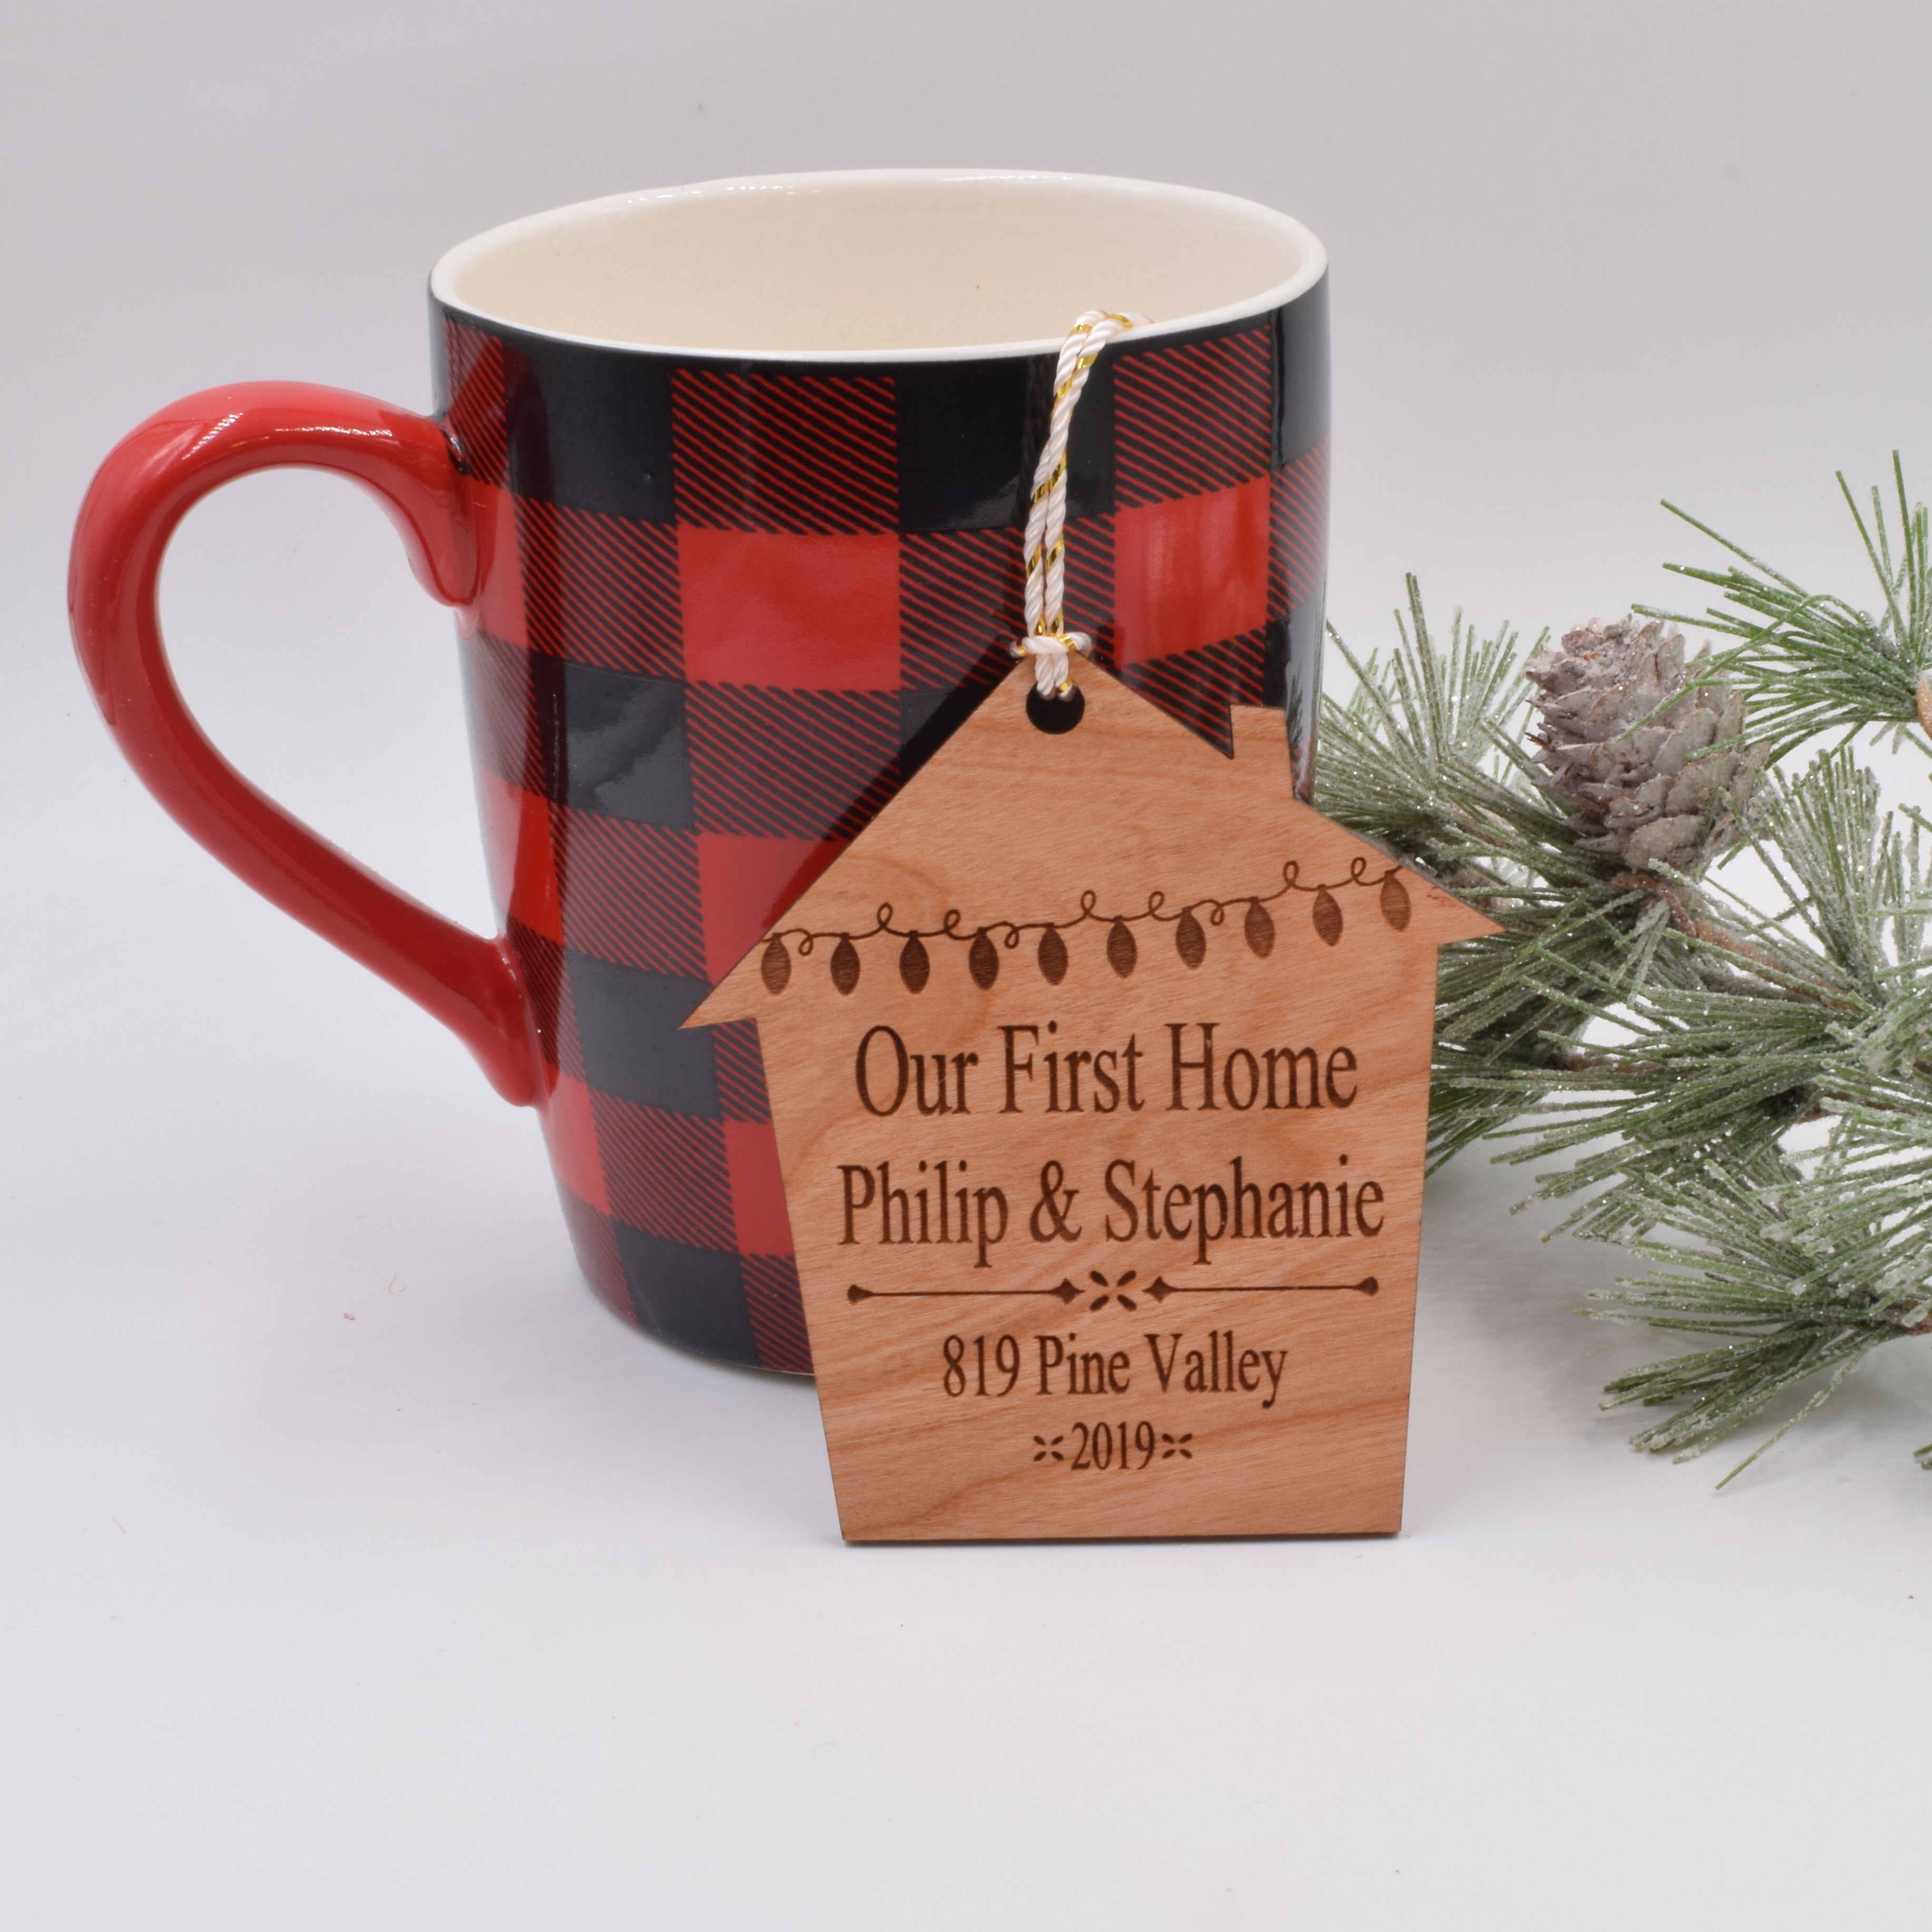 Our First Home Personalized Wood Ornament - Grace and Wood Co.